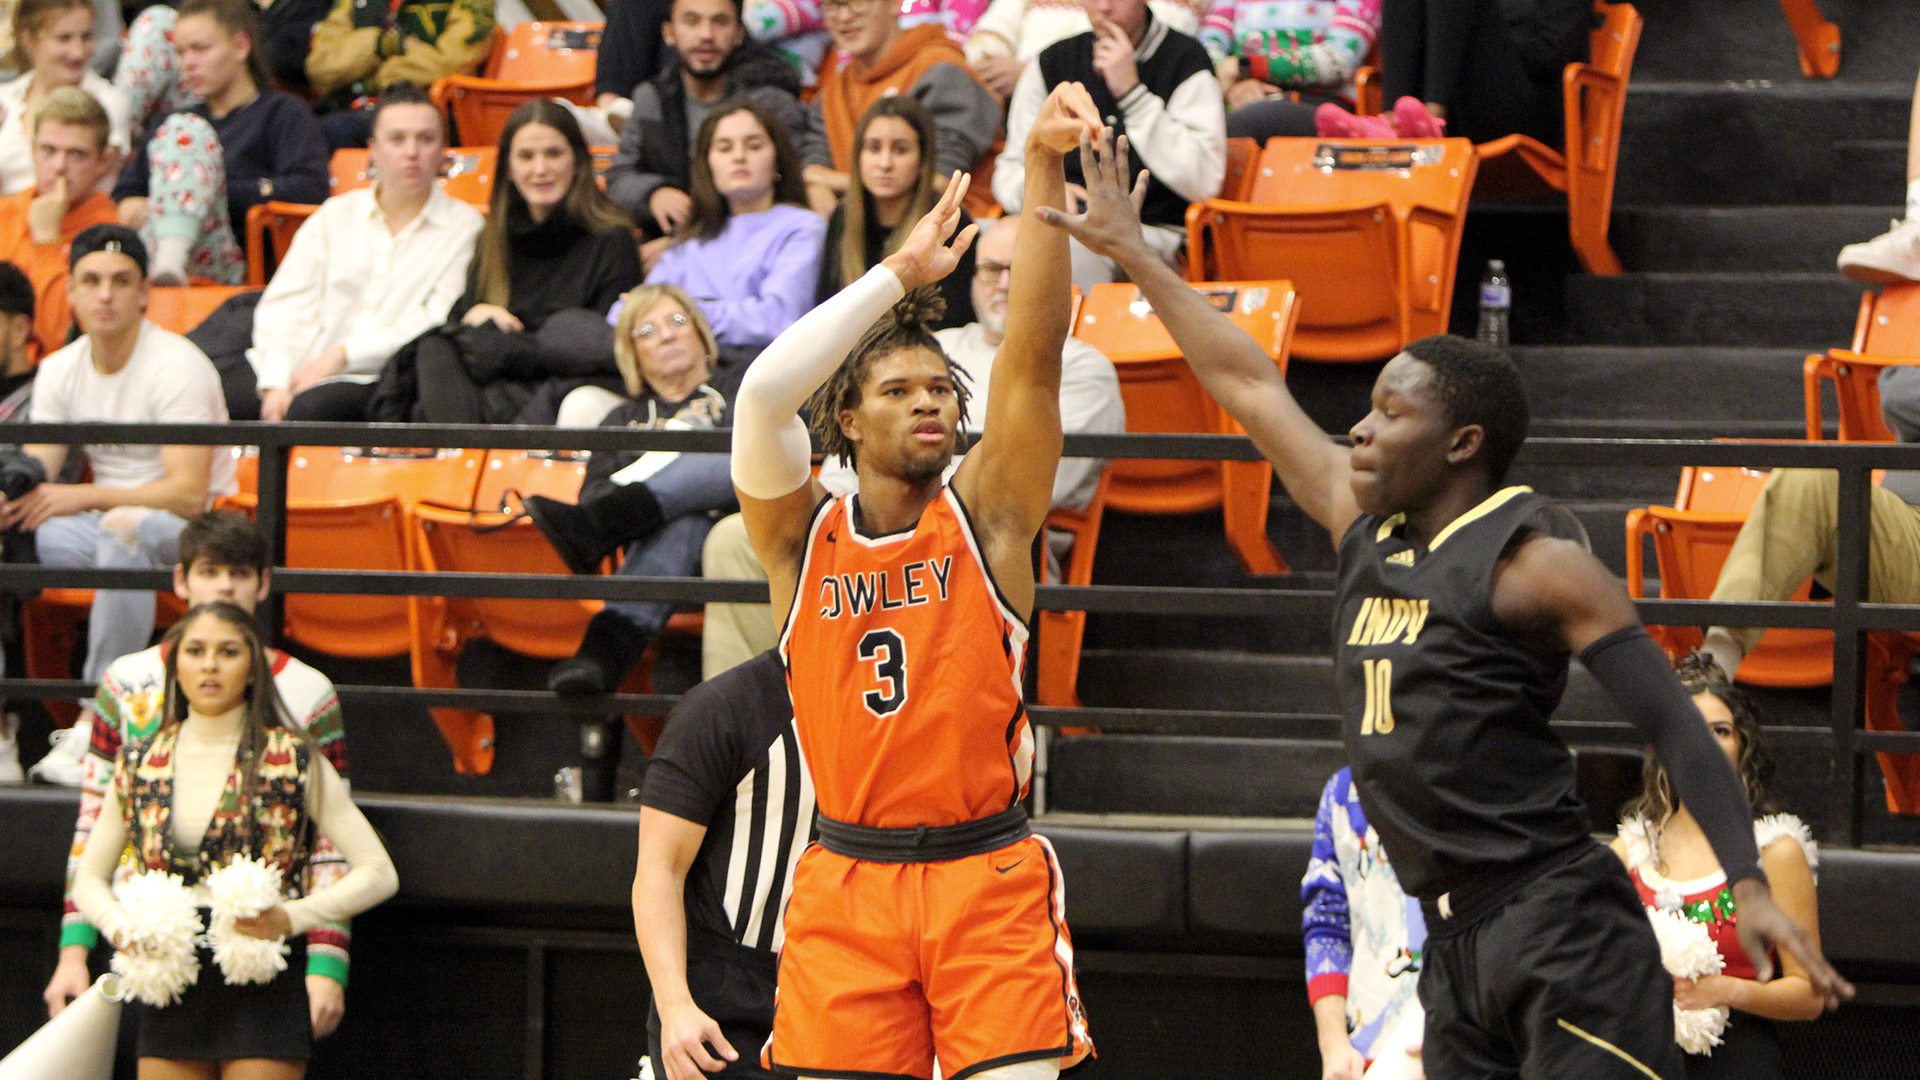 King named Third Team all-conference basketball selection